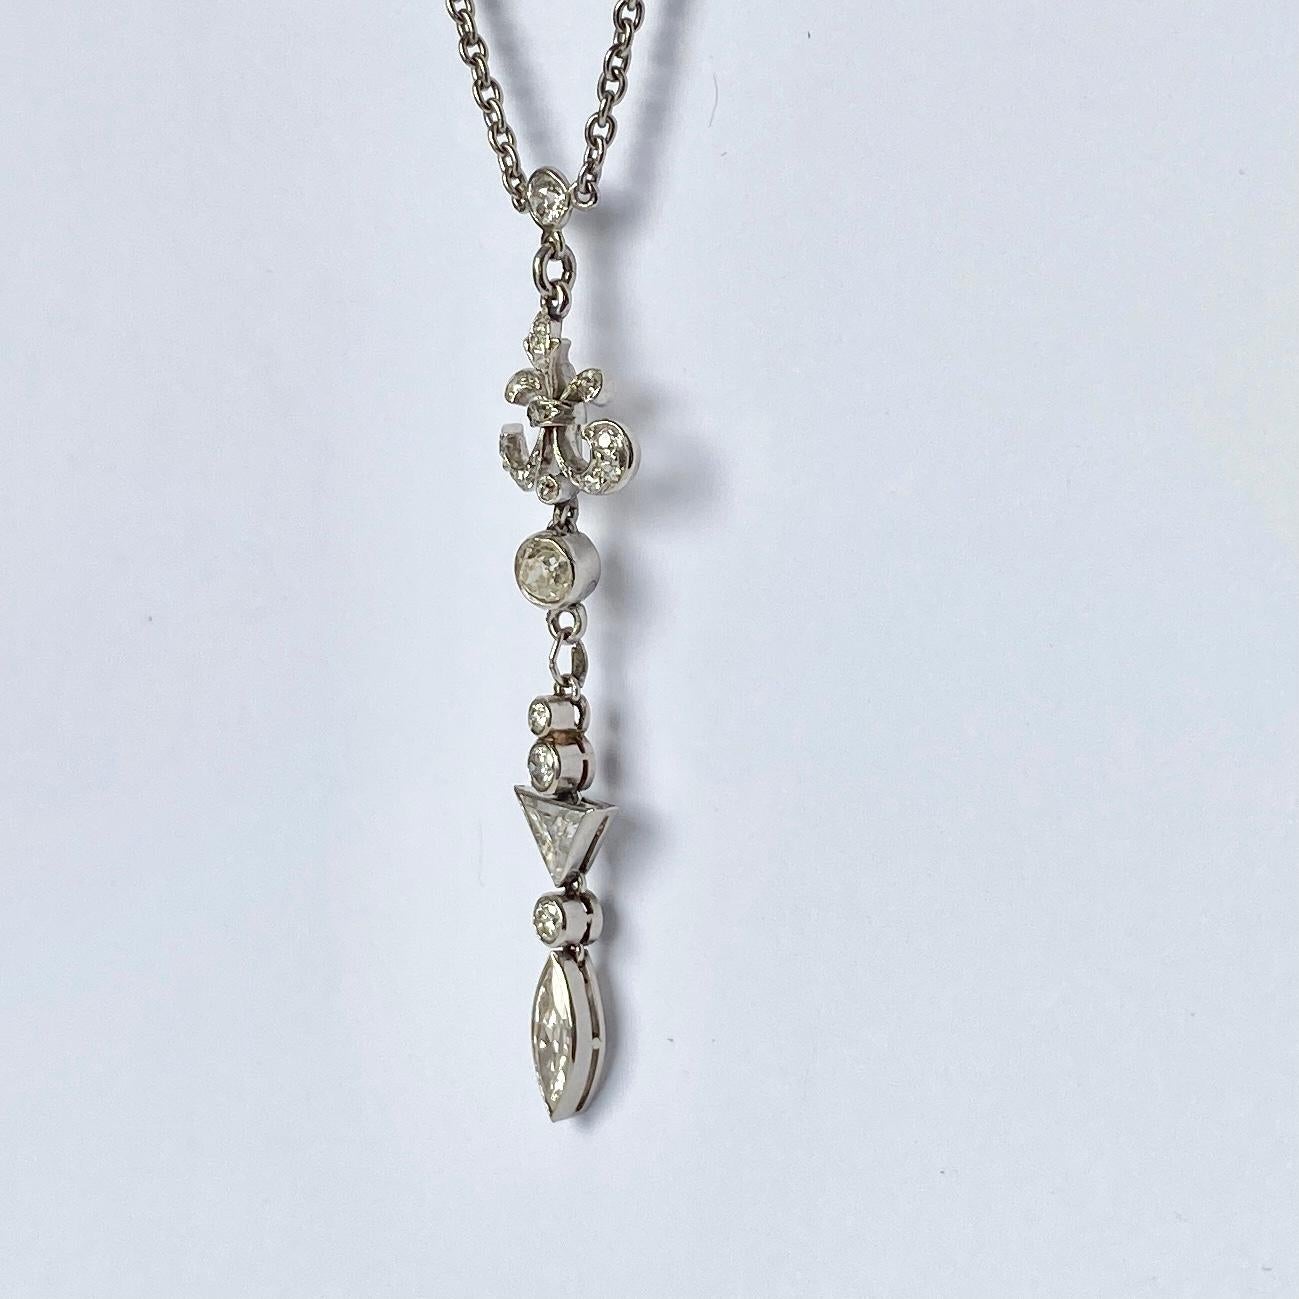 The diamonds in this gorgeous glittering pendant are bright and total approximately 1.9ct. Dotted perfectly around the chain are 10 diamonds which add such a beautiful sparkle. 

Length: 37cm
Drop Length: 5cm

Weight: 8.7g